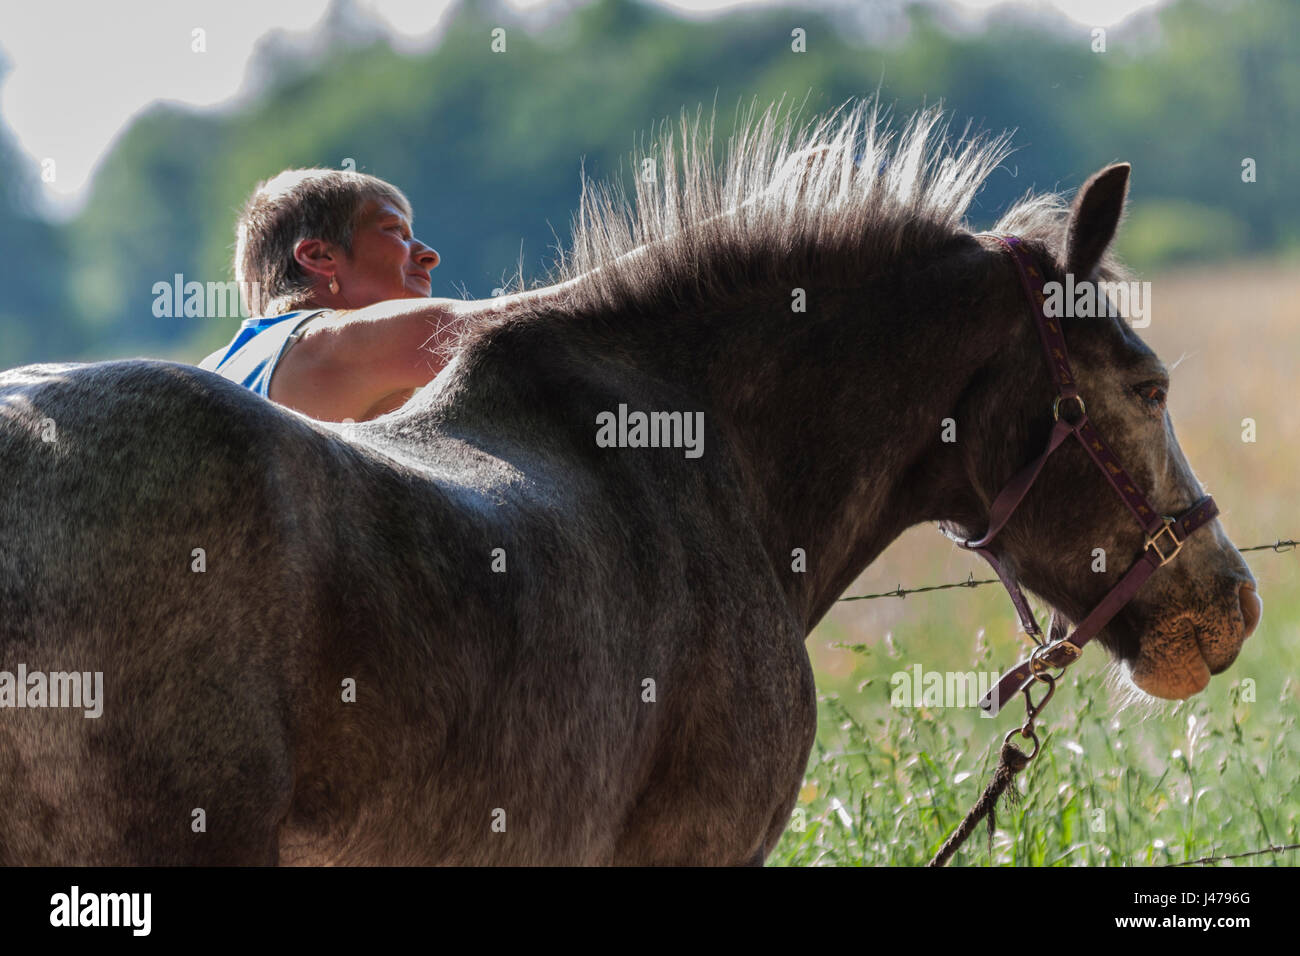 Woman gooming a horse, Osterley Park, Isleworth, Middlesex, England  <a href='https://prime.500px.com/photos/125914325'>License with 500px</a>  <a hre Stock Photo